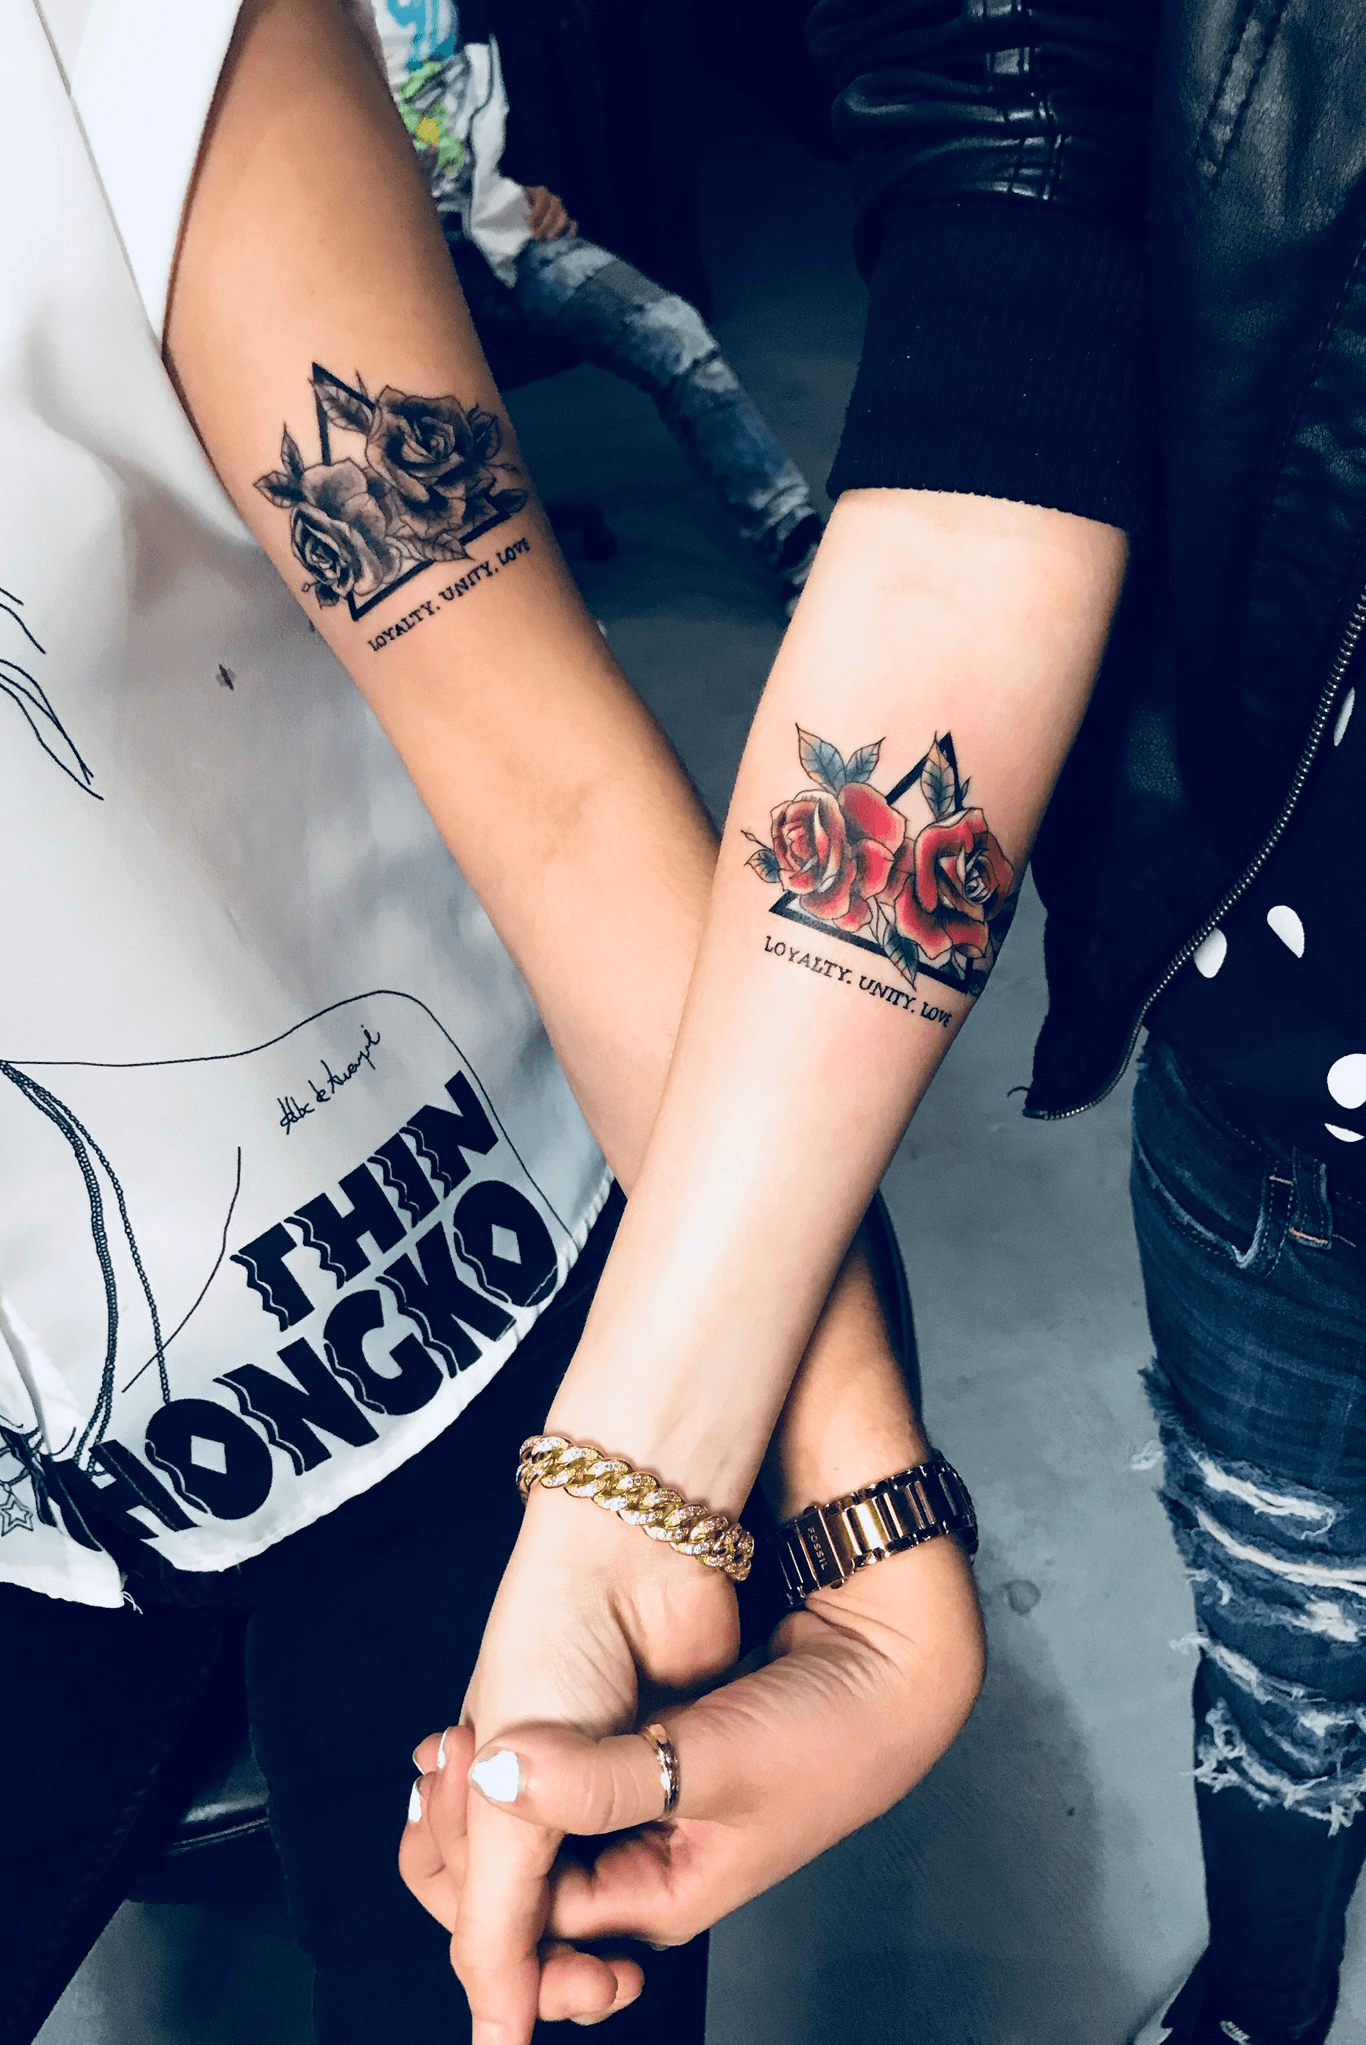 Cool Wedding Tattoo Ideas That Say Youre Couple Goals  DWP Insider